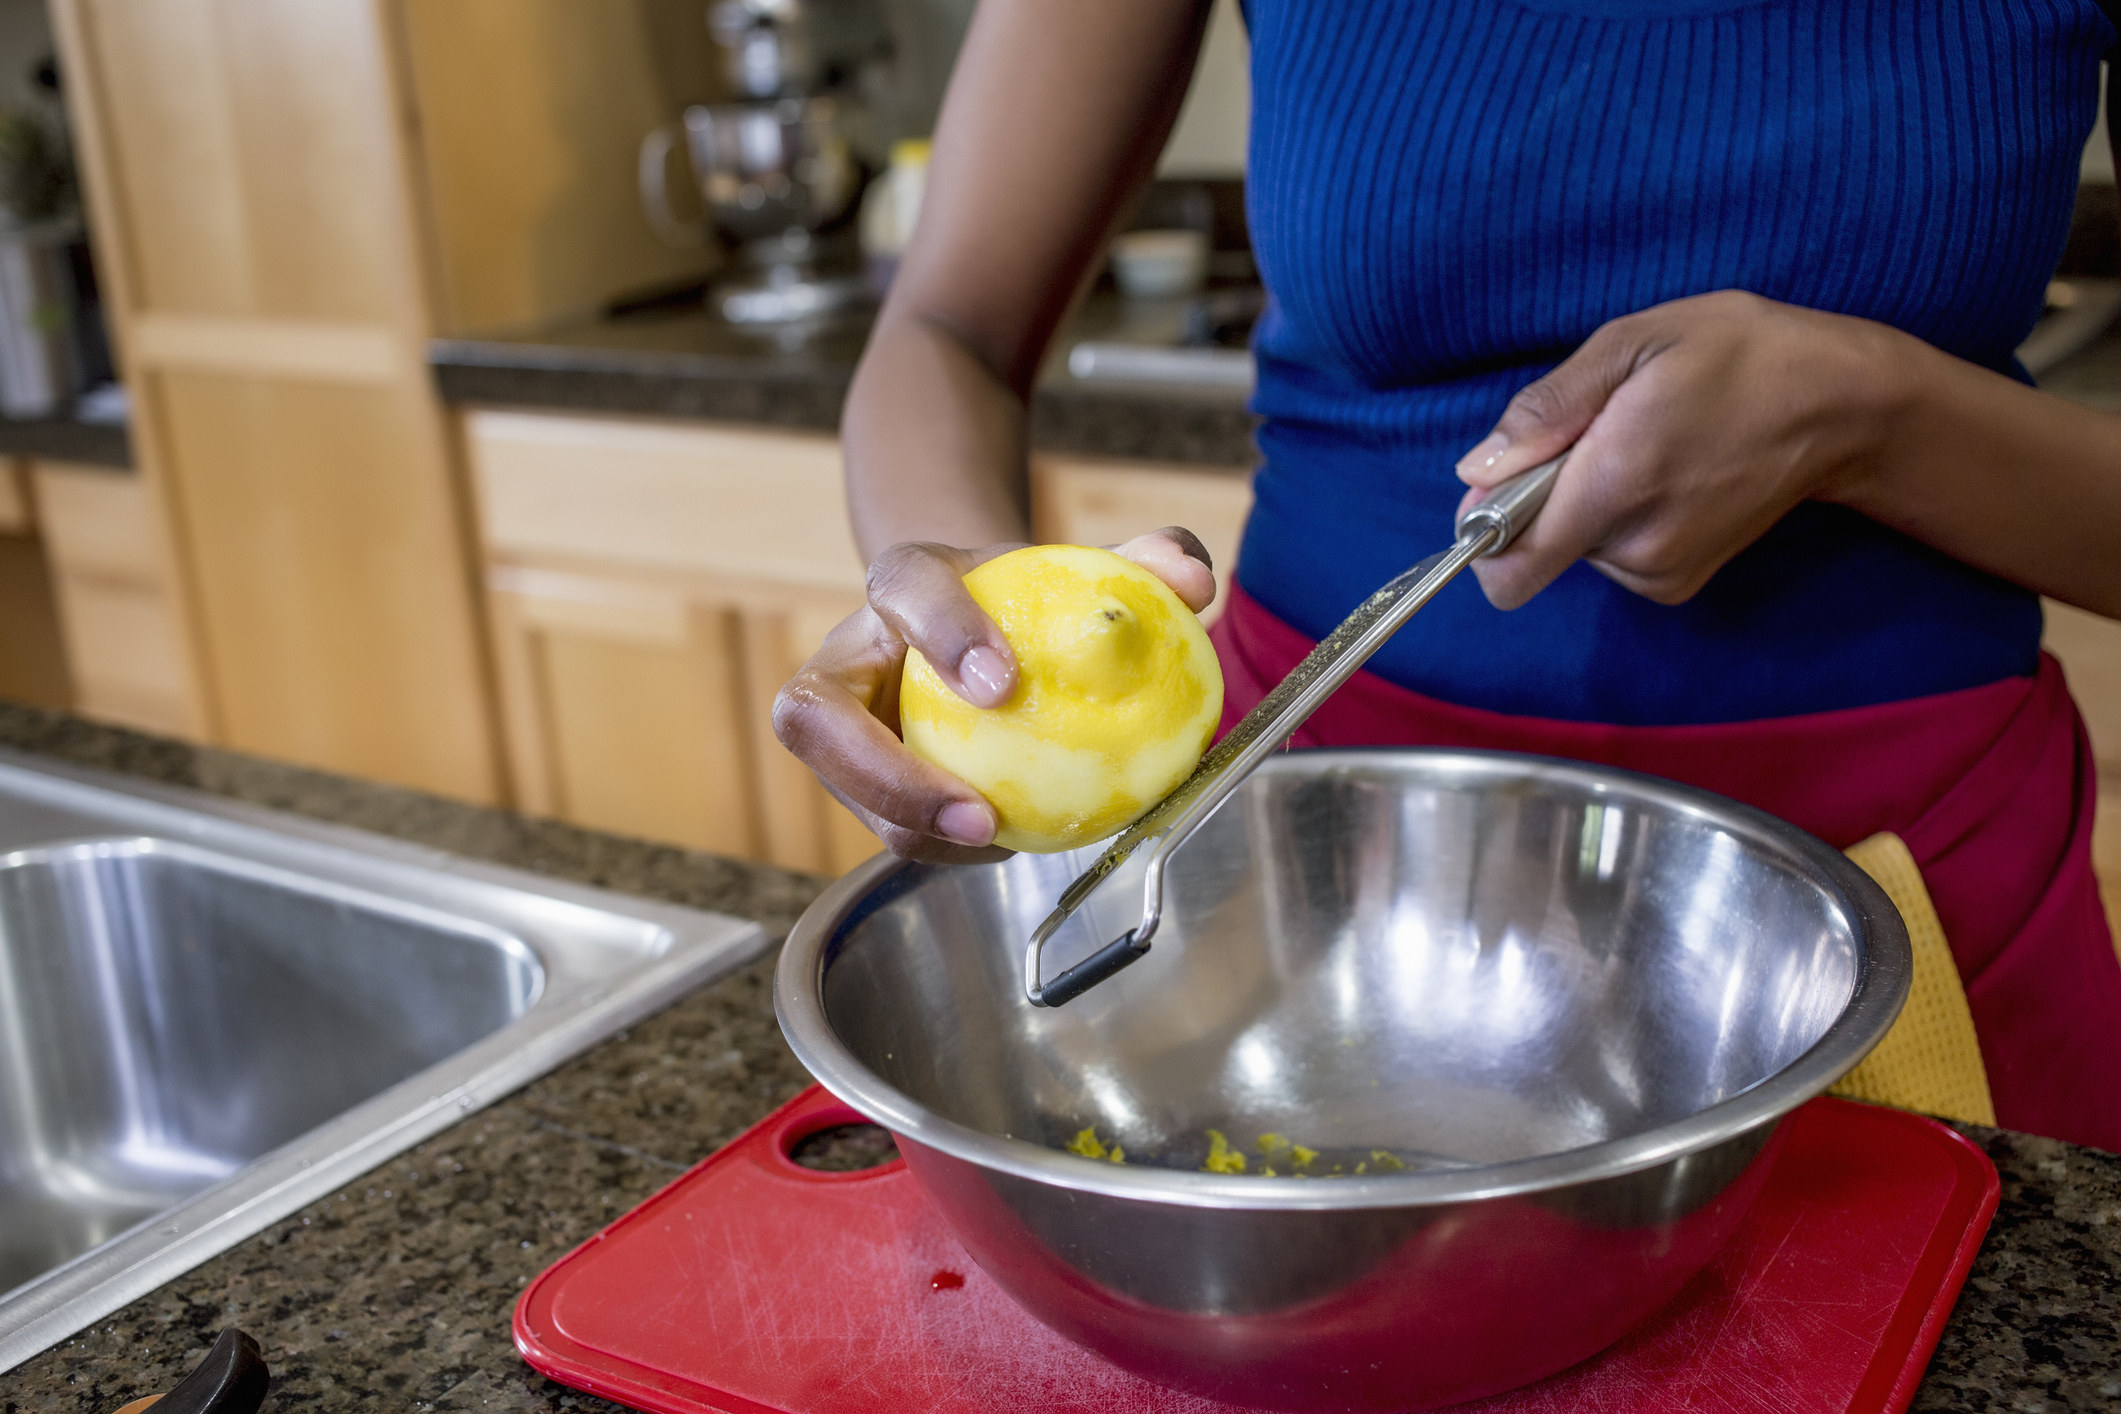 A women zesting a lemon over a bowl in the kitchen